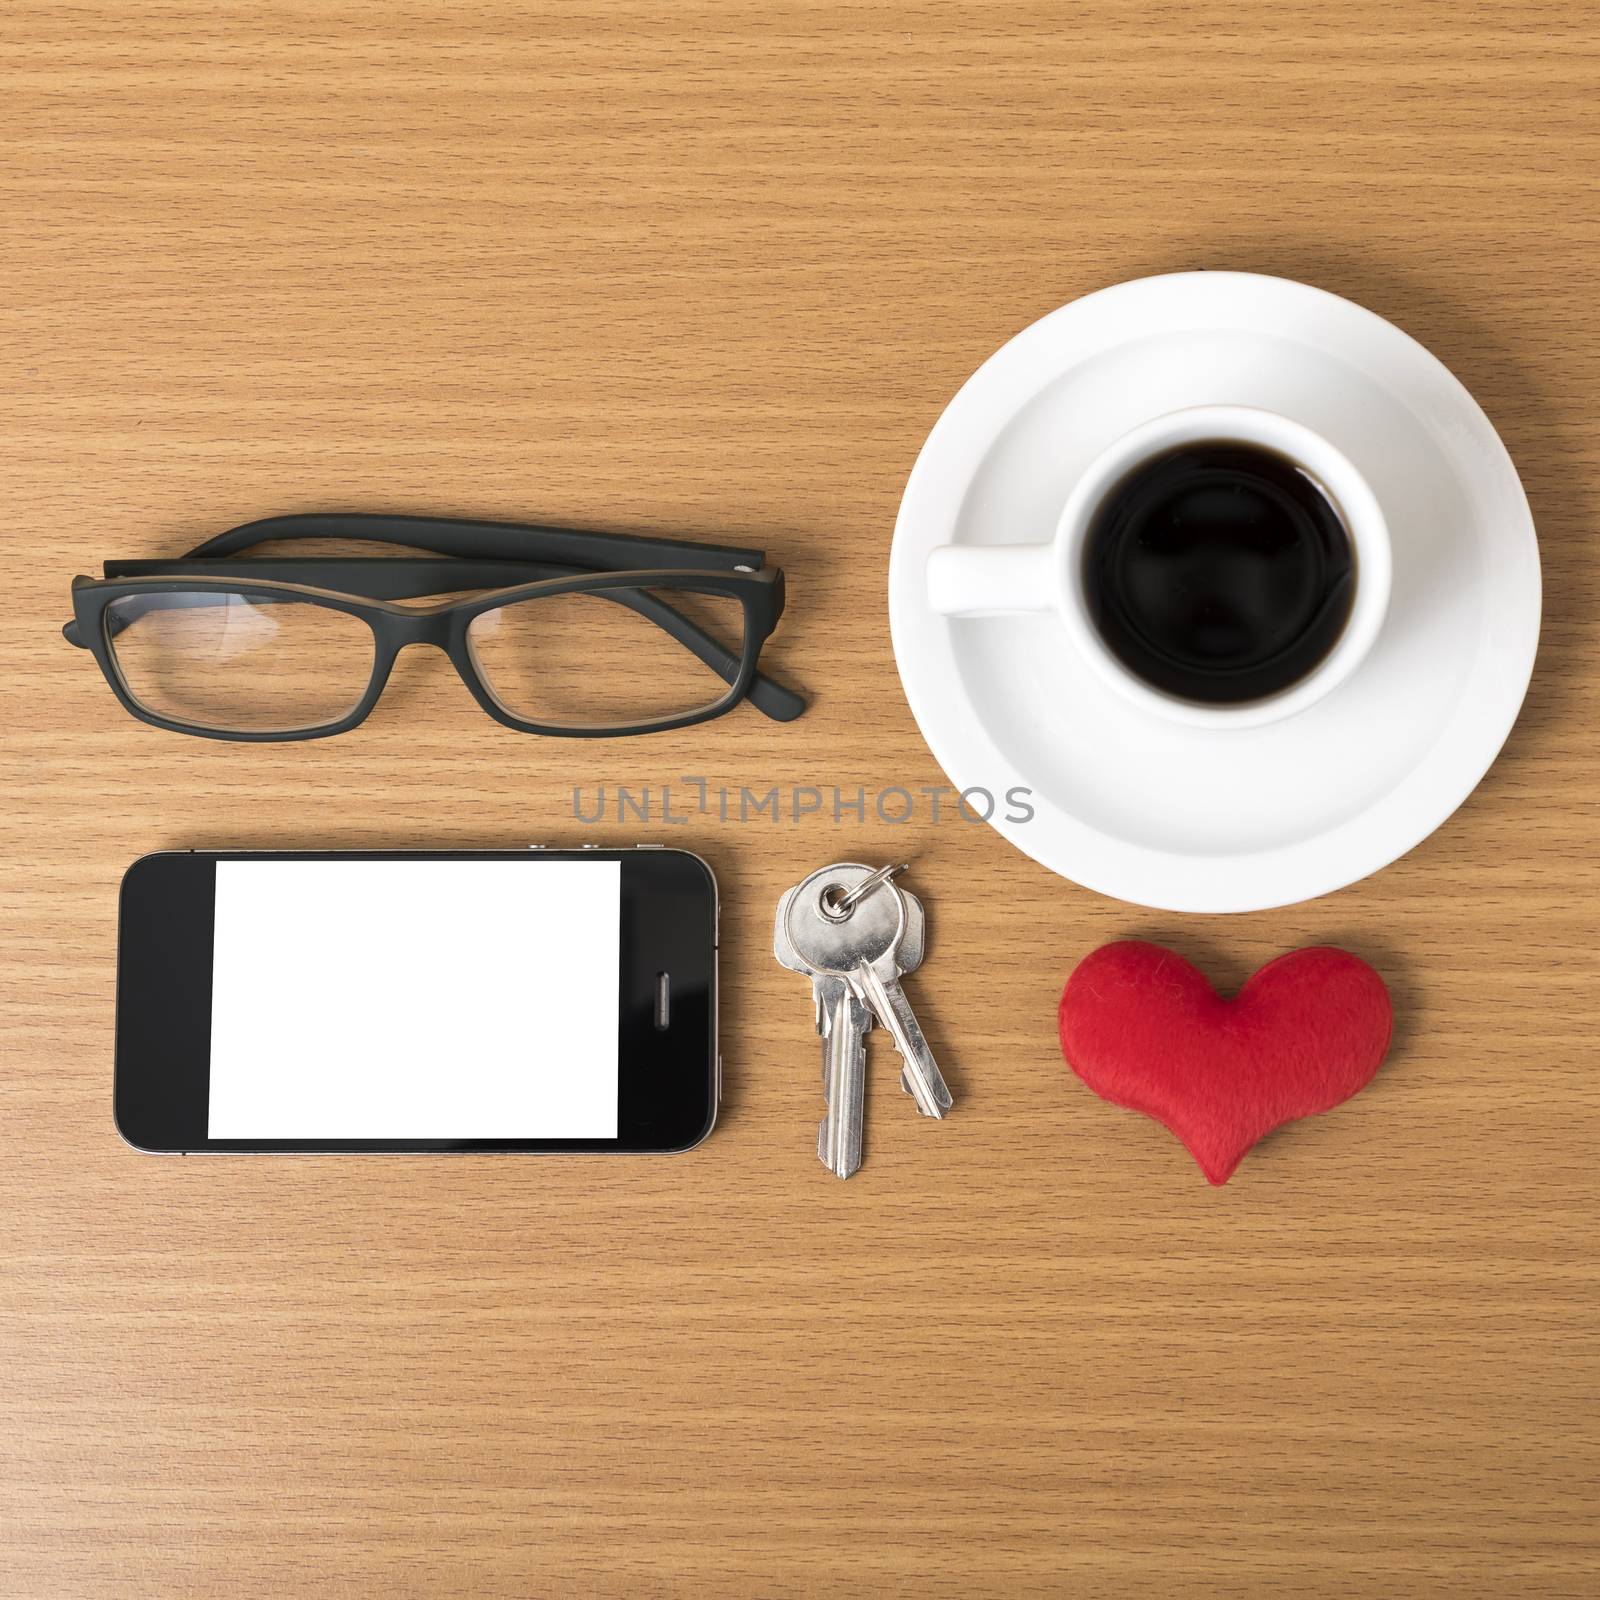 coffee,phone,eyeglasses,key and heart on wood table background